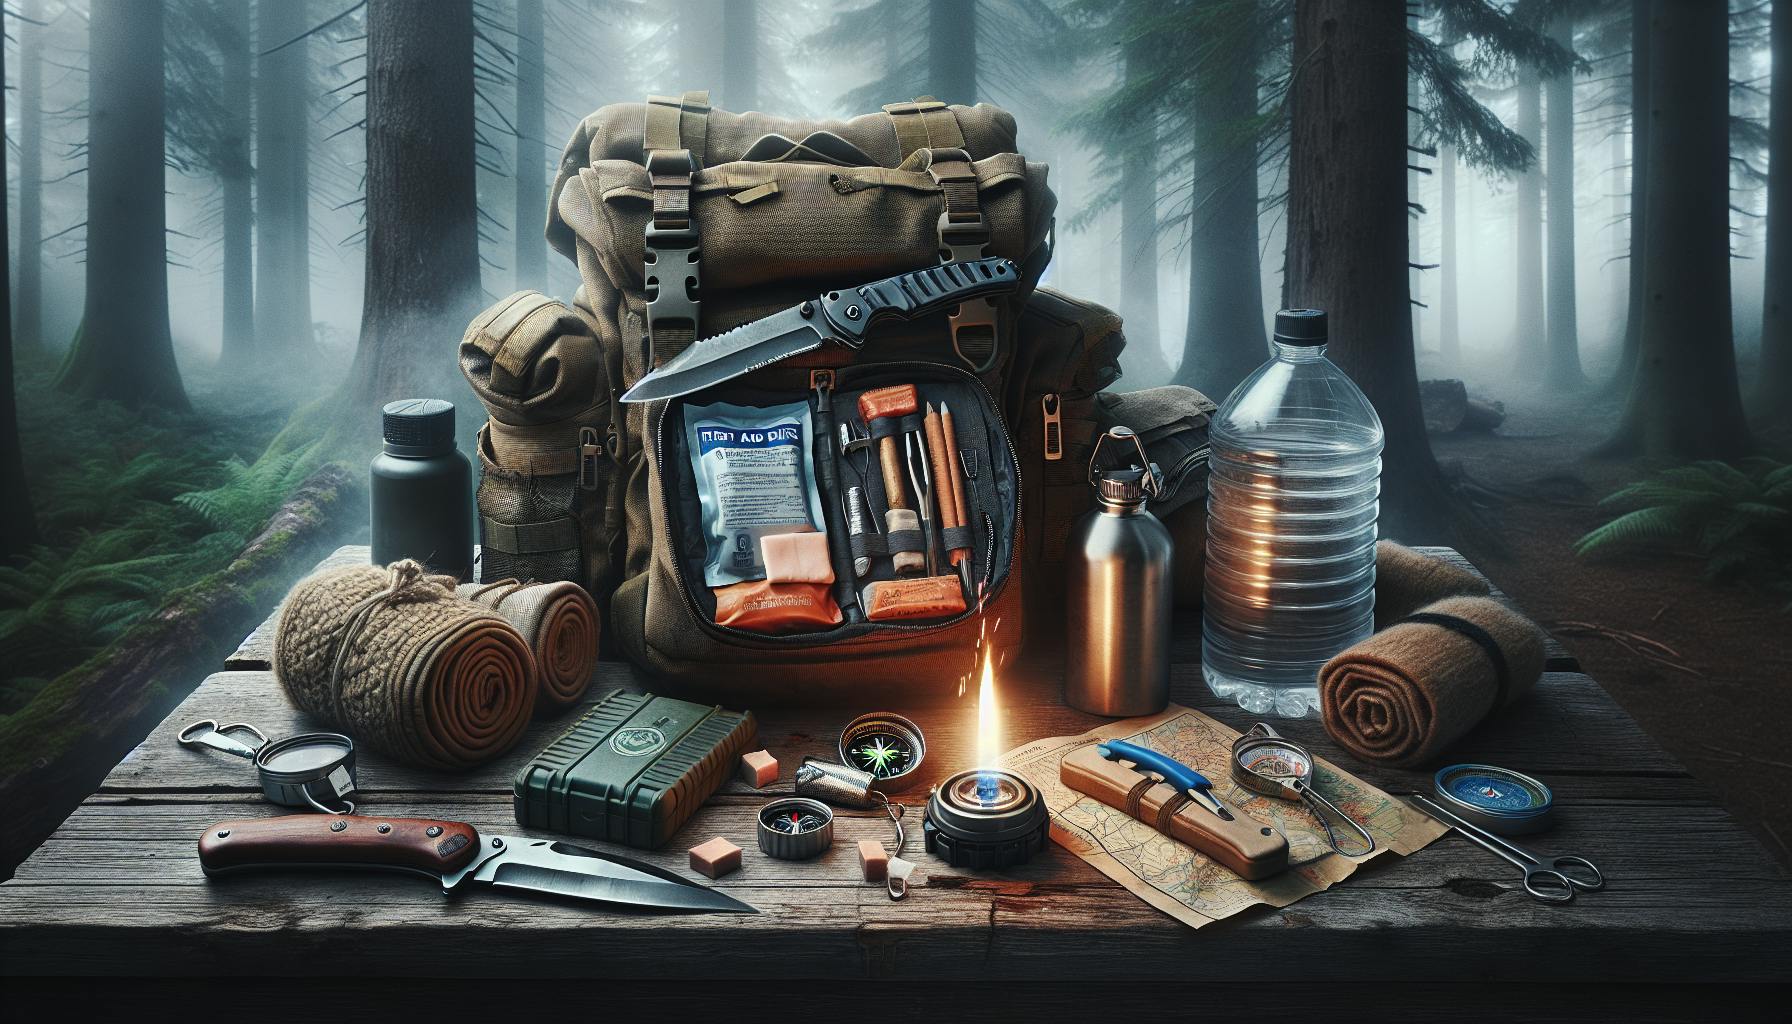 Survival Backpack with Gear Essentials